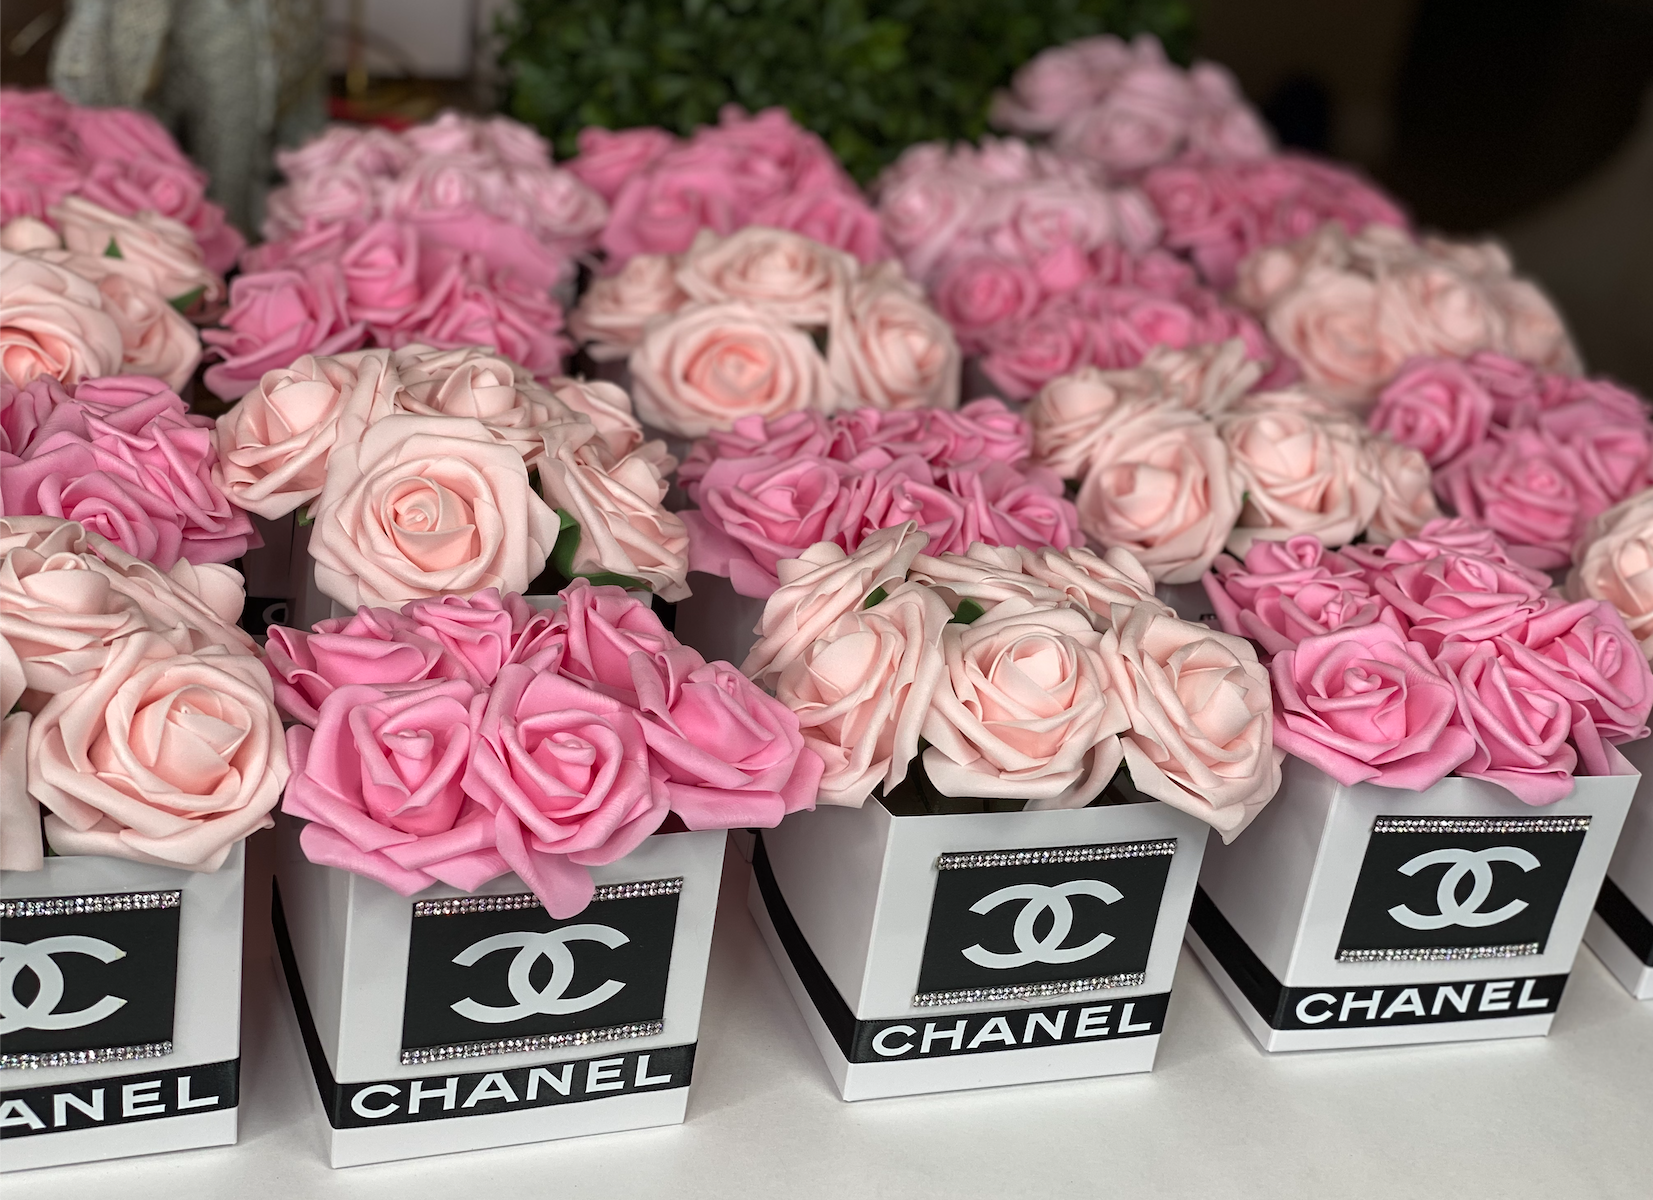 Chanel Birthday Party Ideas  Photo 47 of 112  Chanel birthday party  decoration Chanel birthday party Coco chanel birthday party